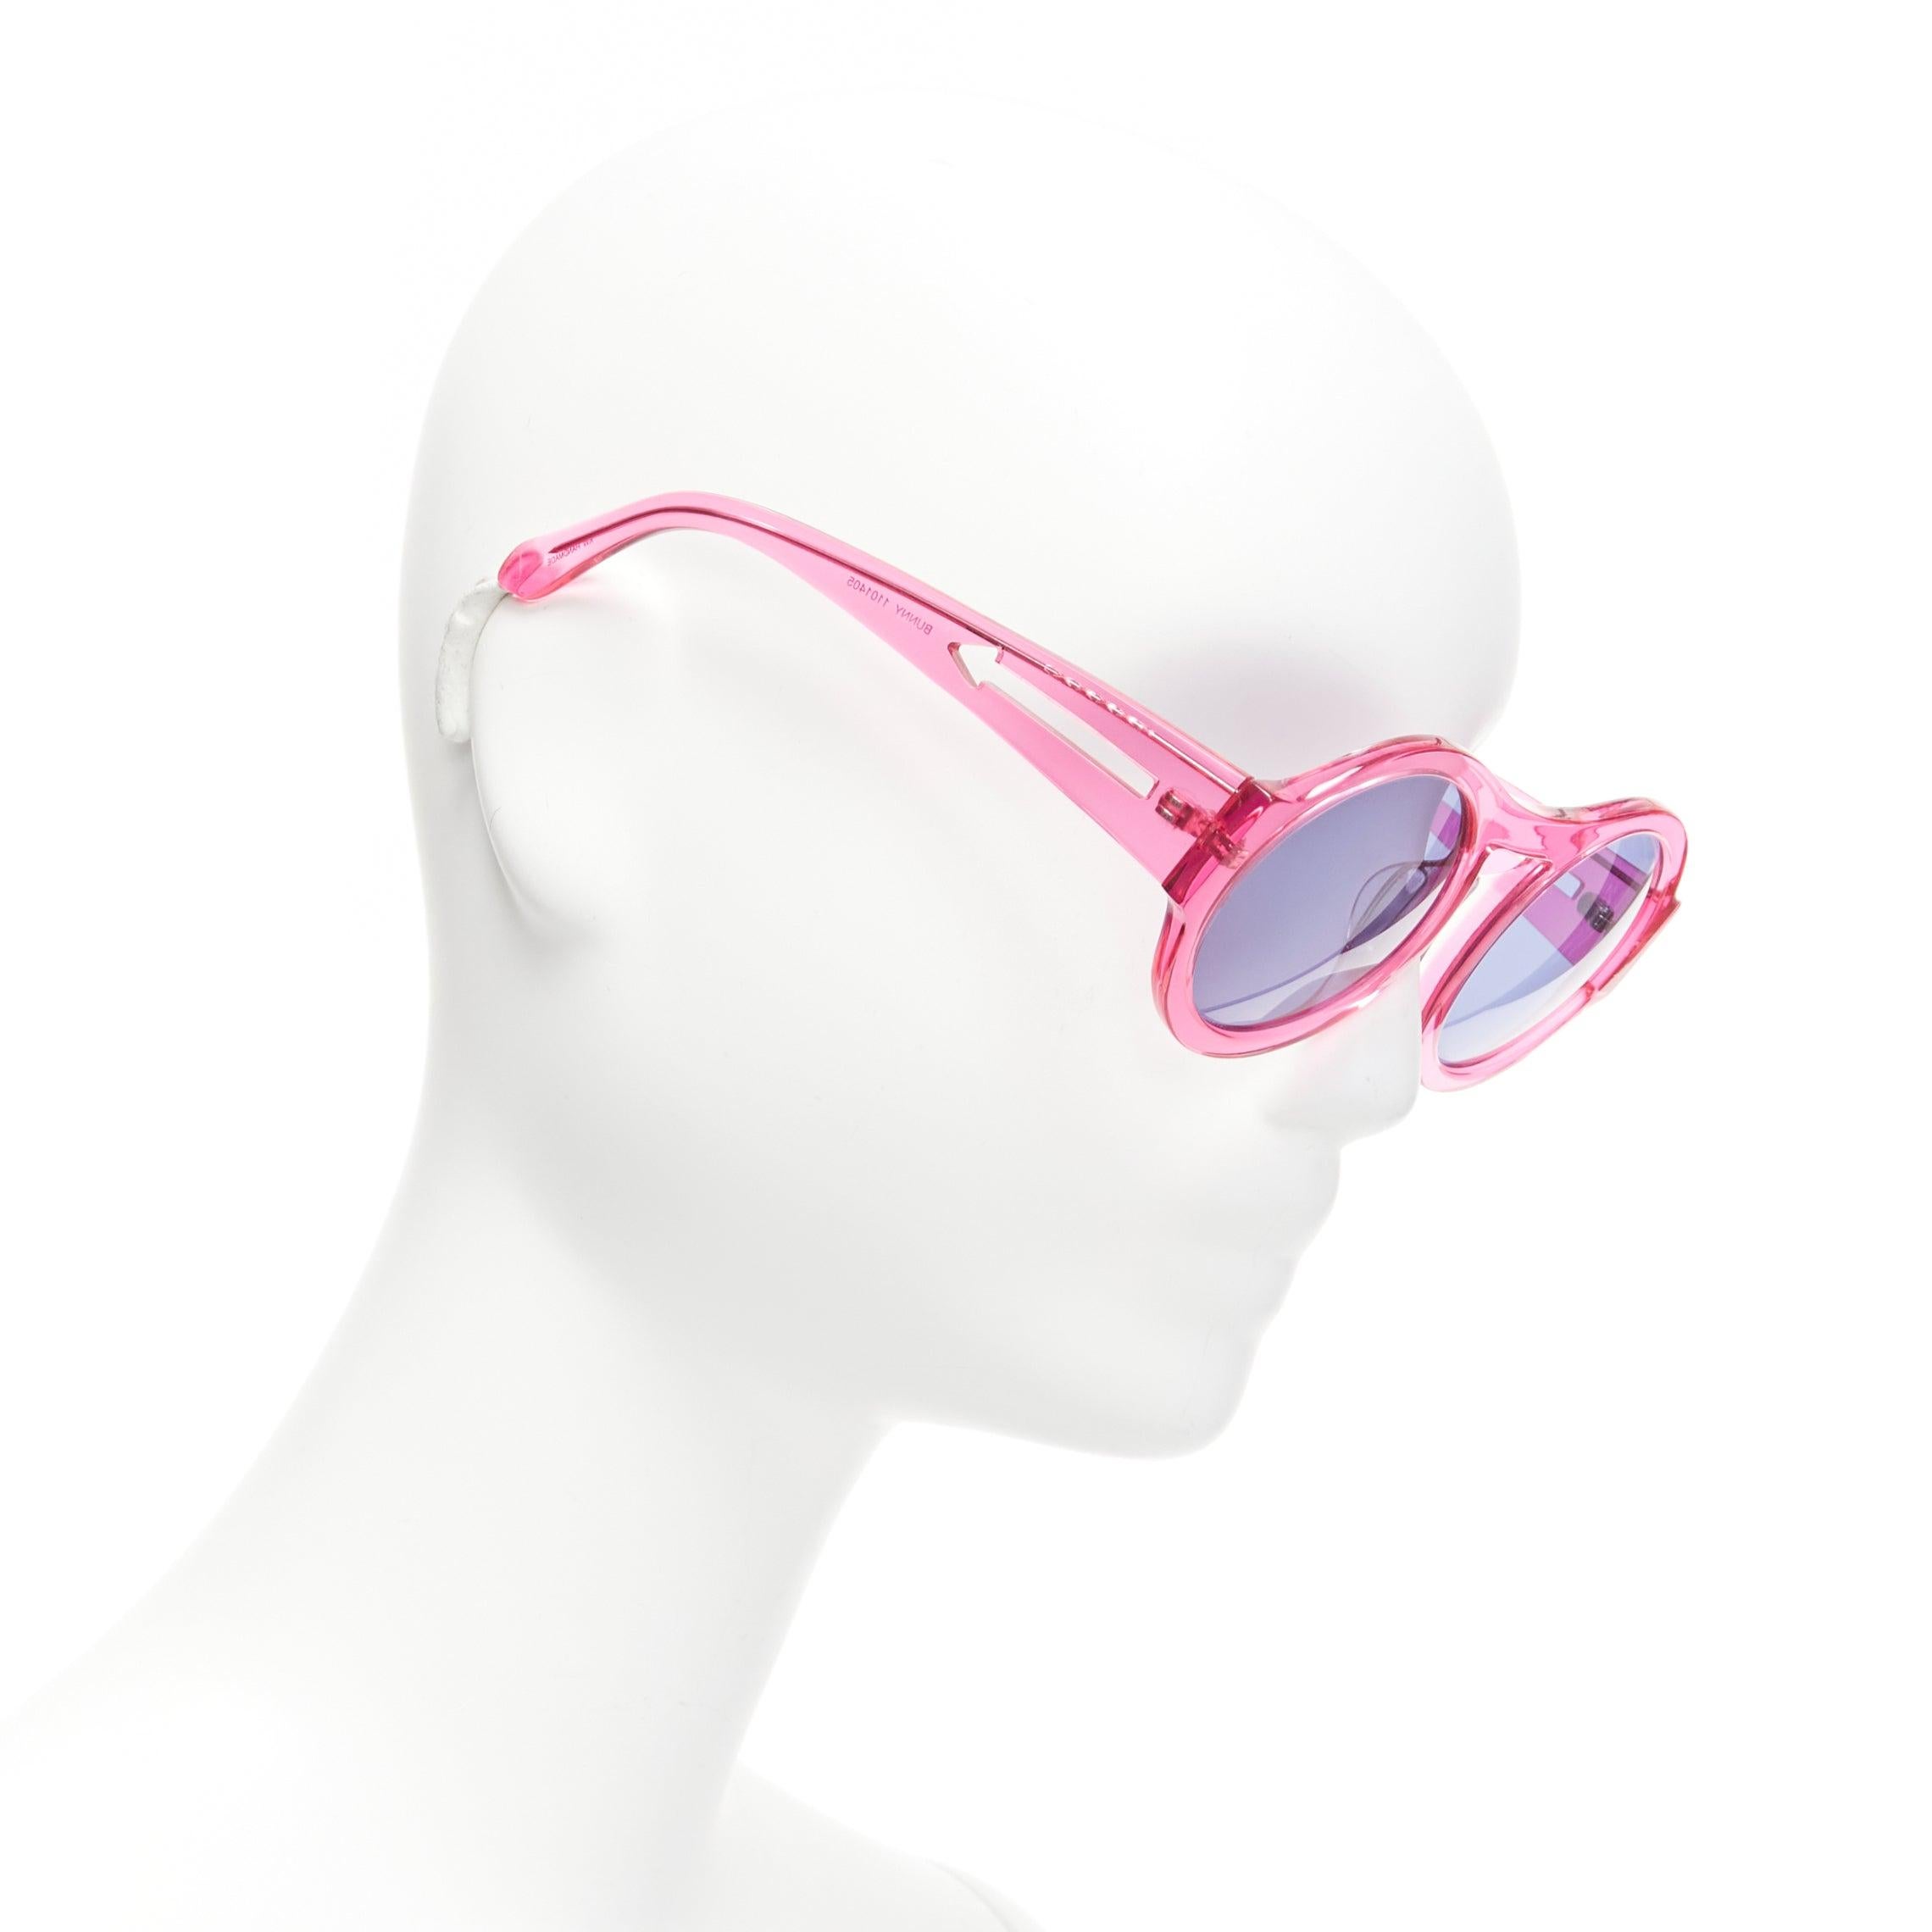 KAREN WALKER Bunny 1101405 clear pink round frame dark blue lens sunglasses
Reference: NKLL/A00088
Brand: Karen Walker
Model: Bunny 1101405
Material: Resin
Color: Pink, Navy
Pattern: Solid
Made in: China

CONDITION:
Condition: Excellent, this item